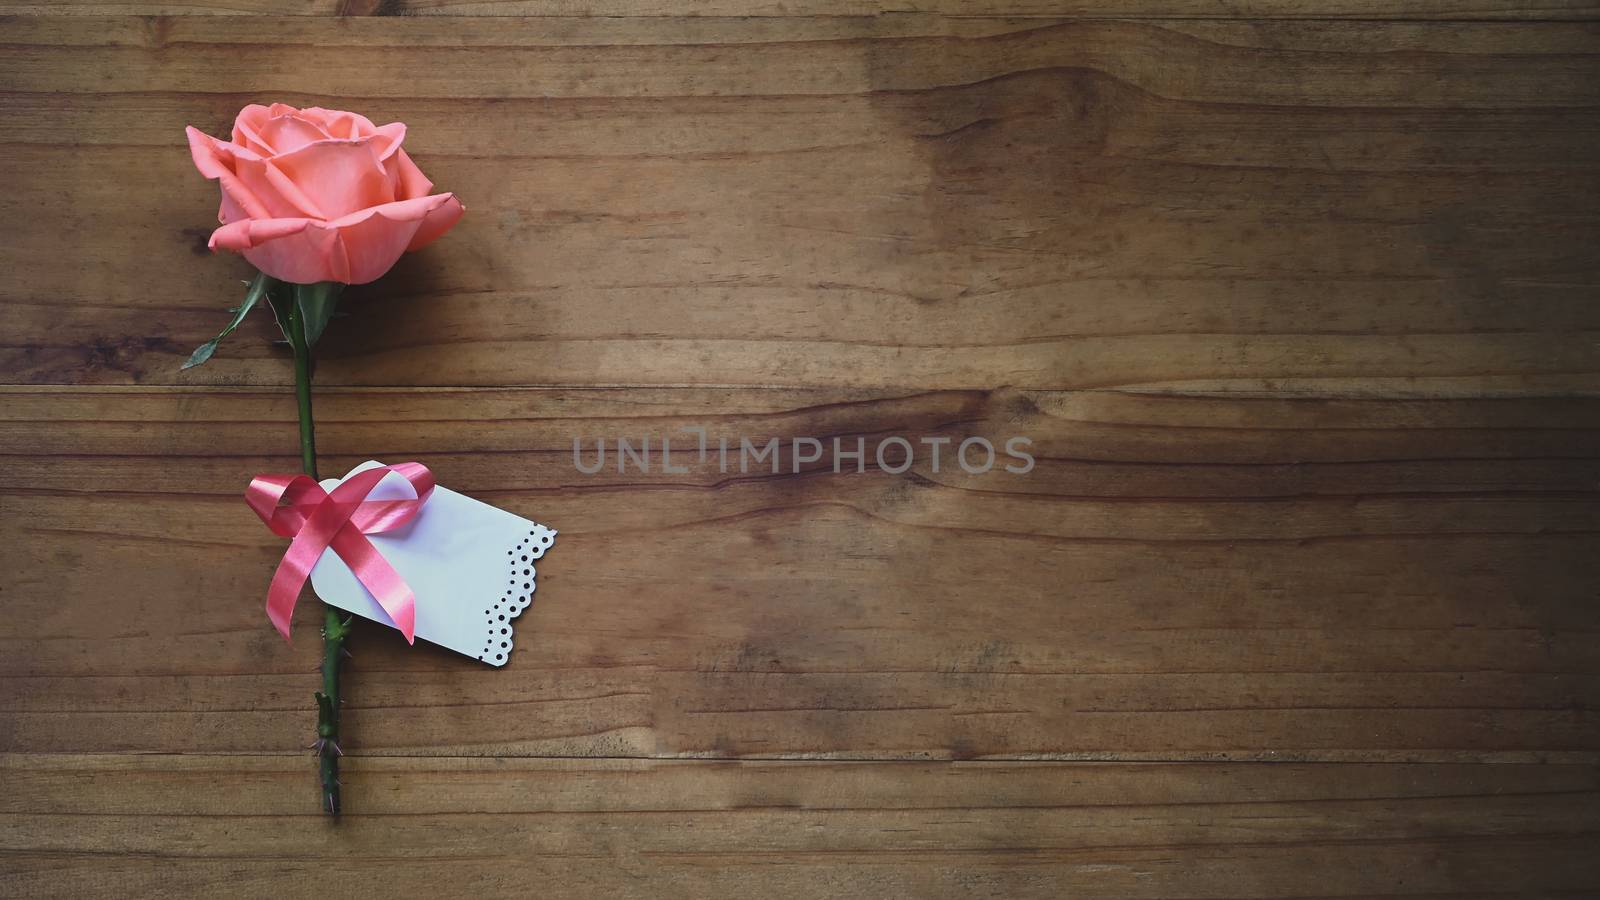 Top view image of pink rose and wishes card tied together with r by prathanchorruangsak